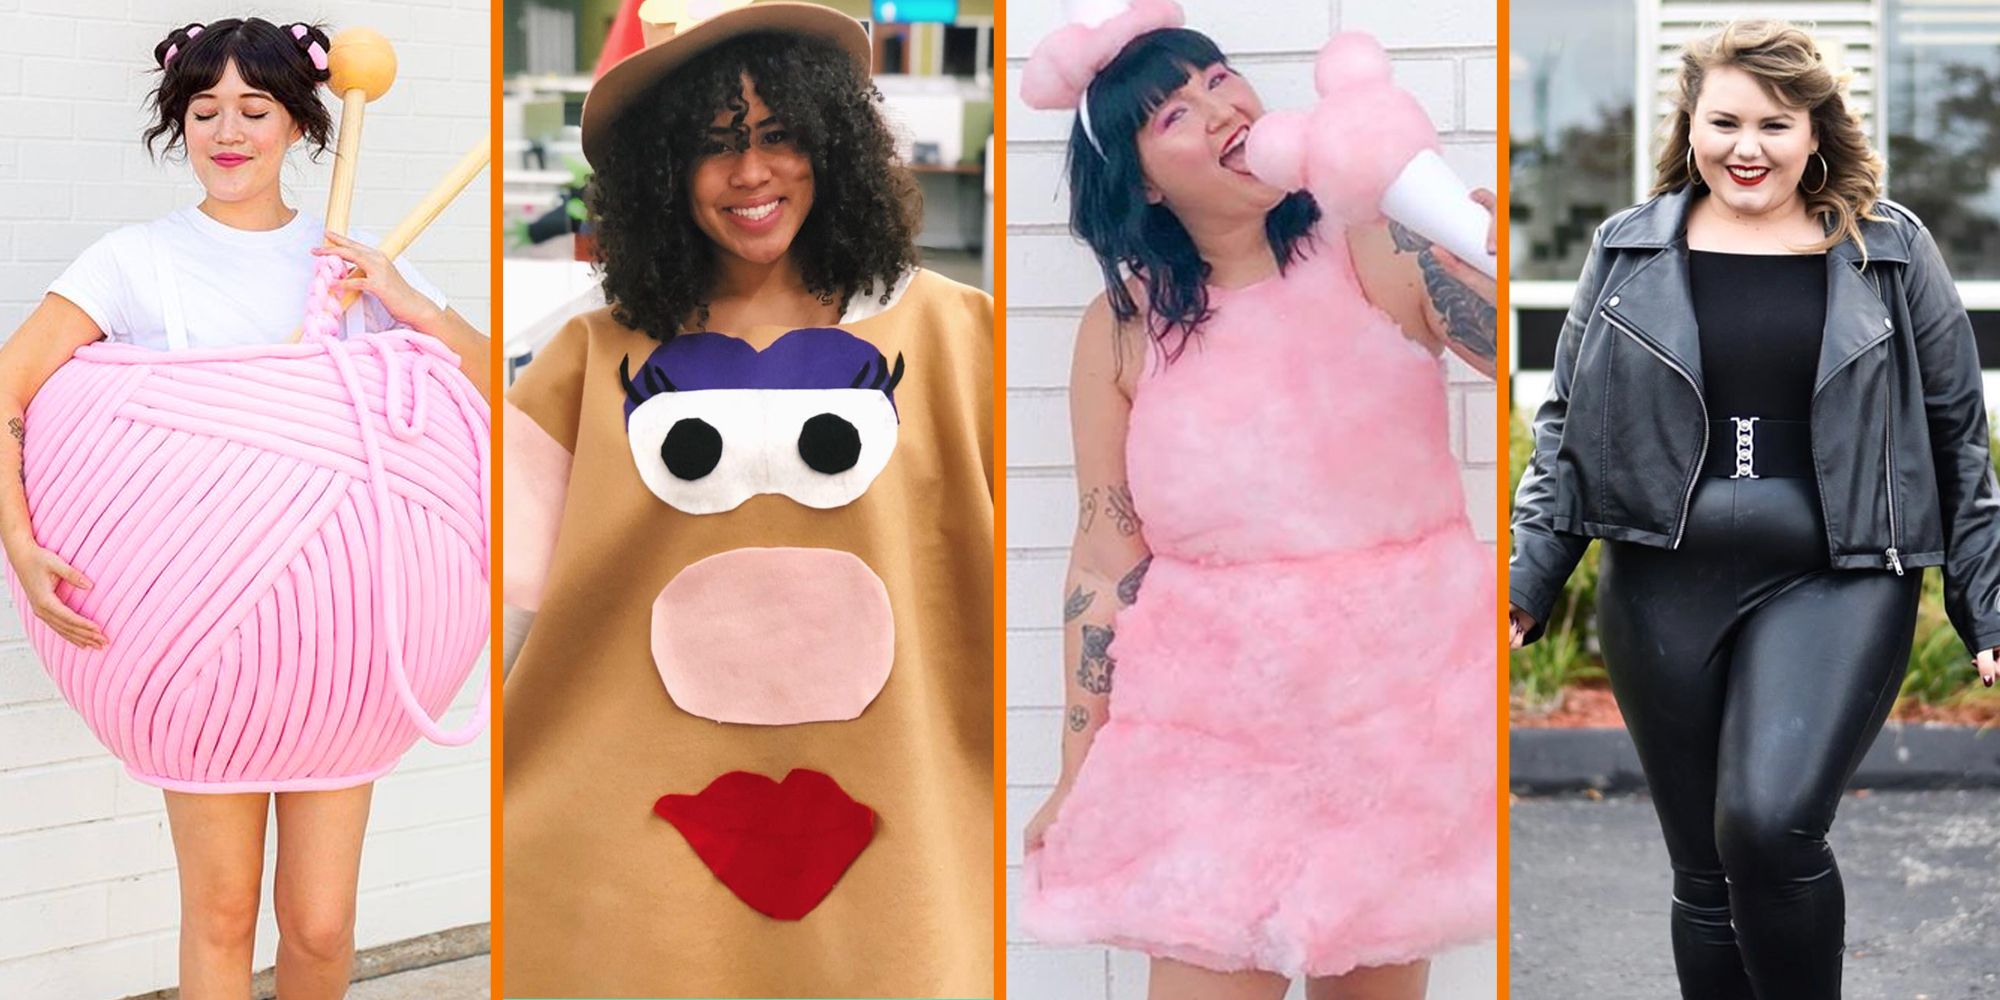 Makeup Artist's Meme-Themed Birthday Party Will Inspire Your Halloween  Costume | YourTango